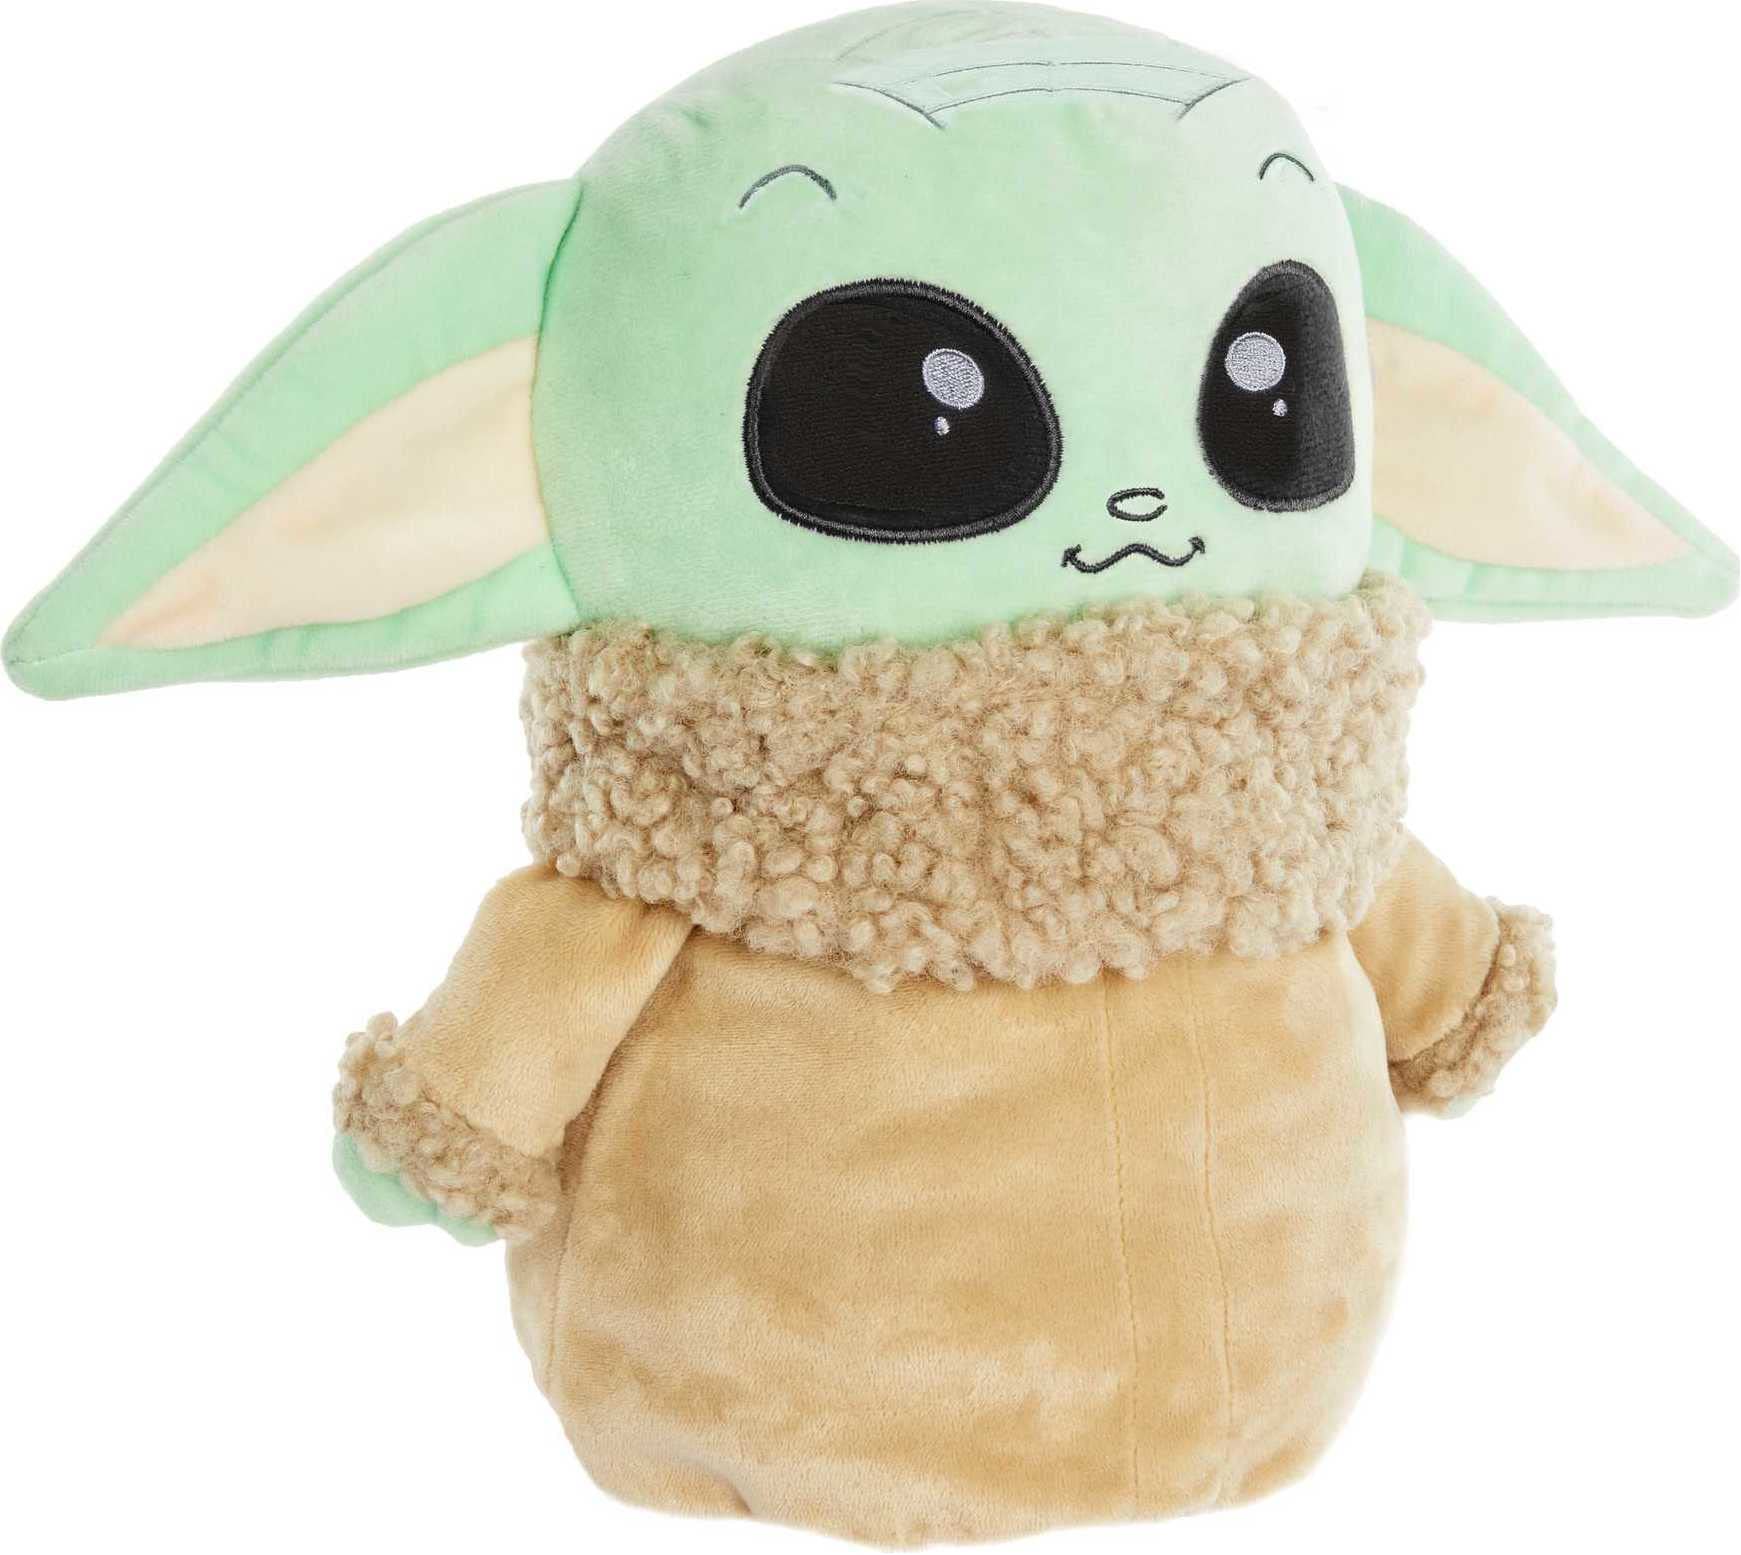 Mattel ​Star Wars Jumping Grogu Plush Toy with Jumping Action and Sounds, Soft Doll Inspired by Star Wars Mandalorian Book of Boba Fett